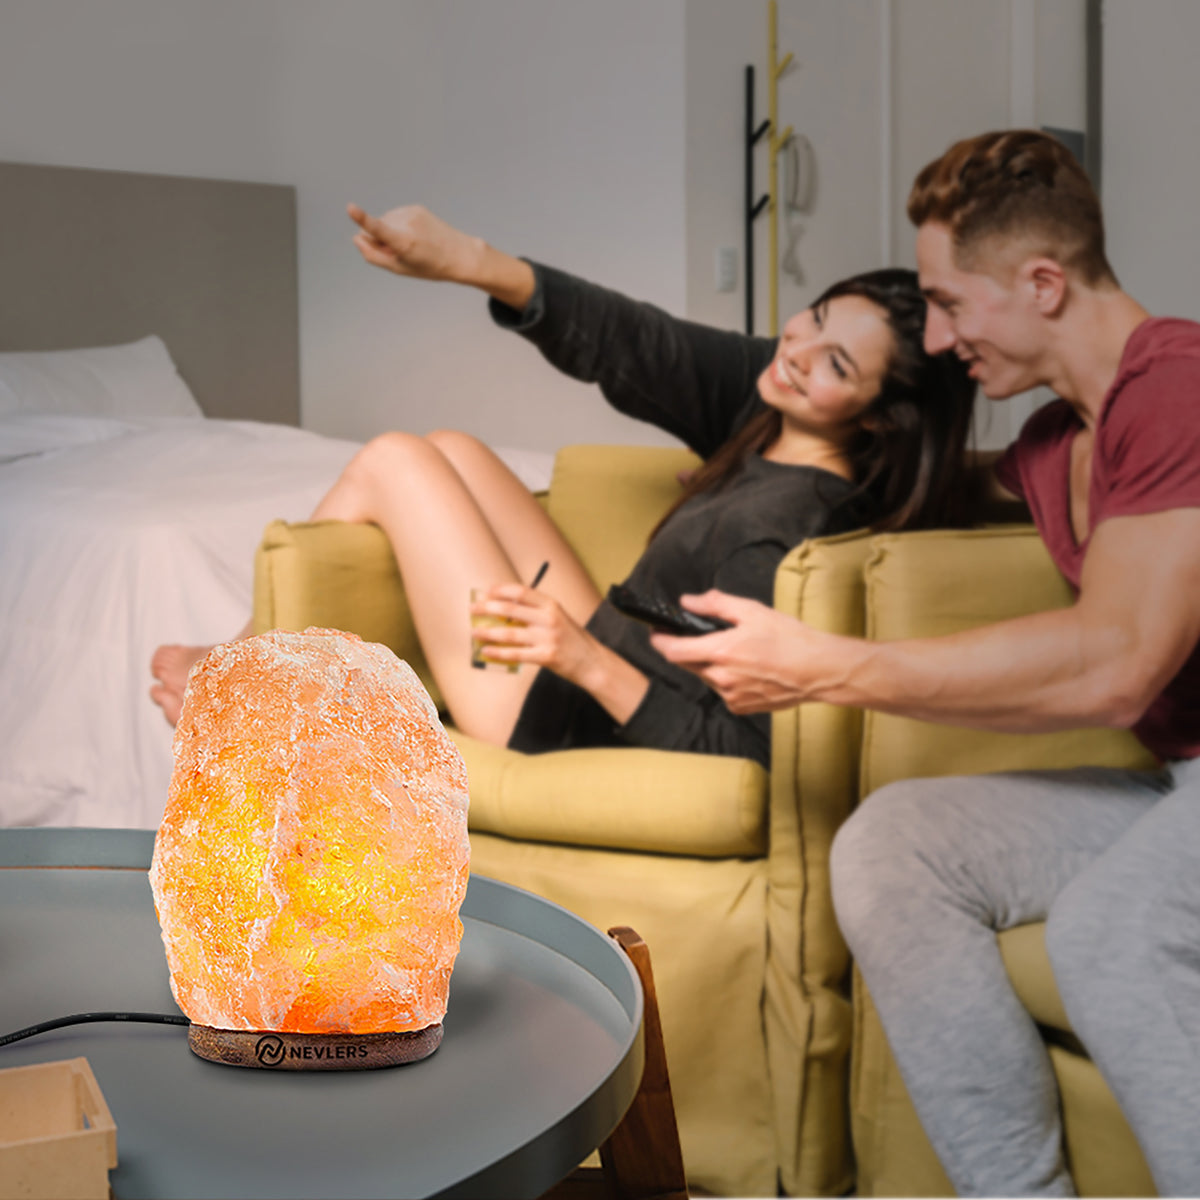 Himalayan Salt Lamp With Dimmer | Natural Shape - 2 Pack